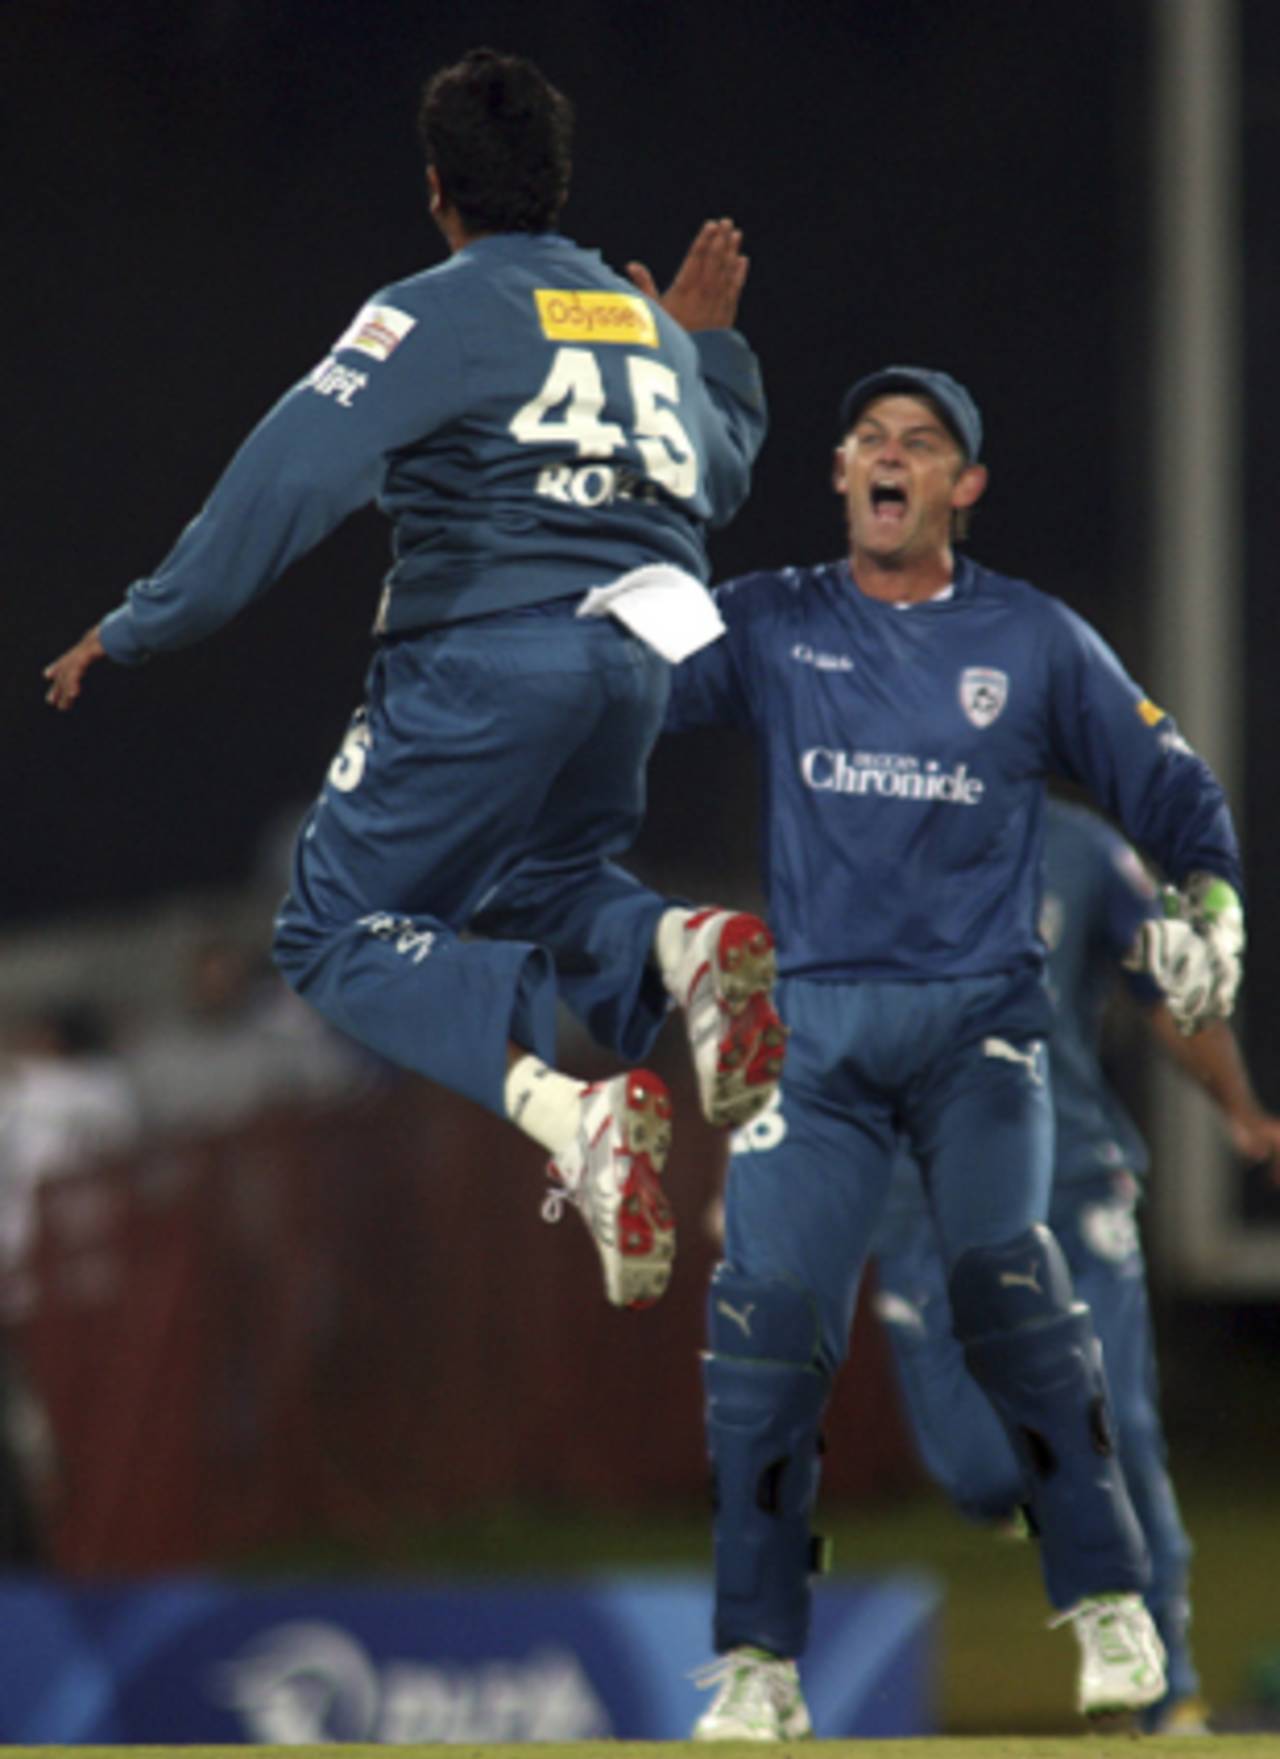 Rohit Sharma celebrates his hat-trick with Adam Gilchrist, Deccan Chargers v Mumbai Indians, IPL, 32nd match, Centurion, May 6, 2009